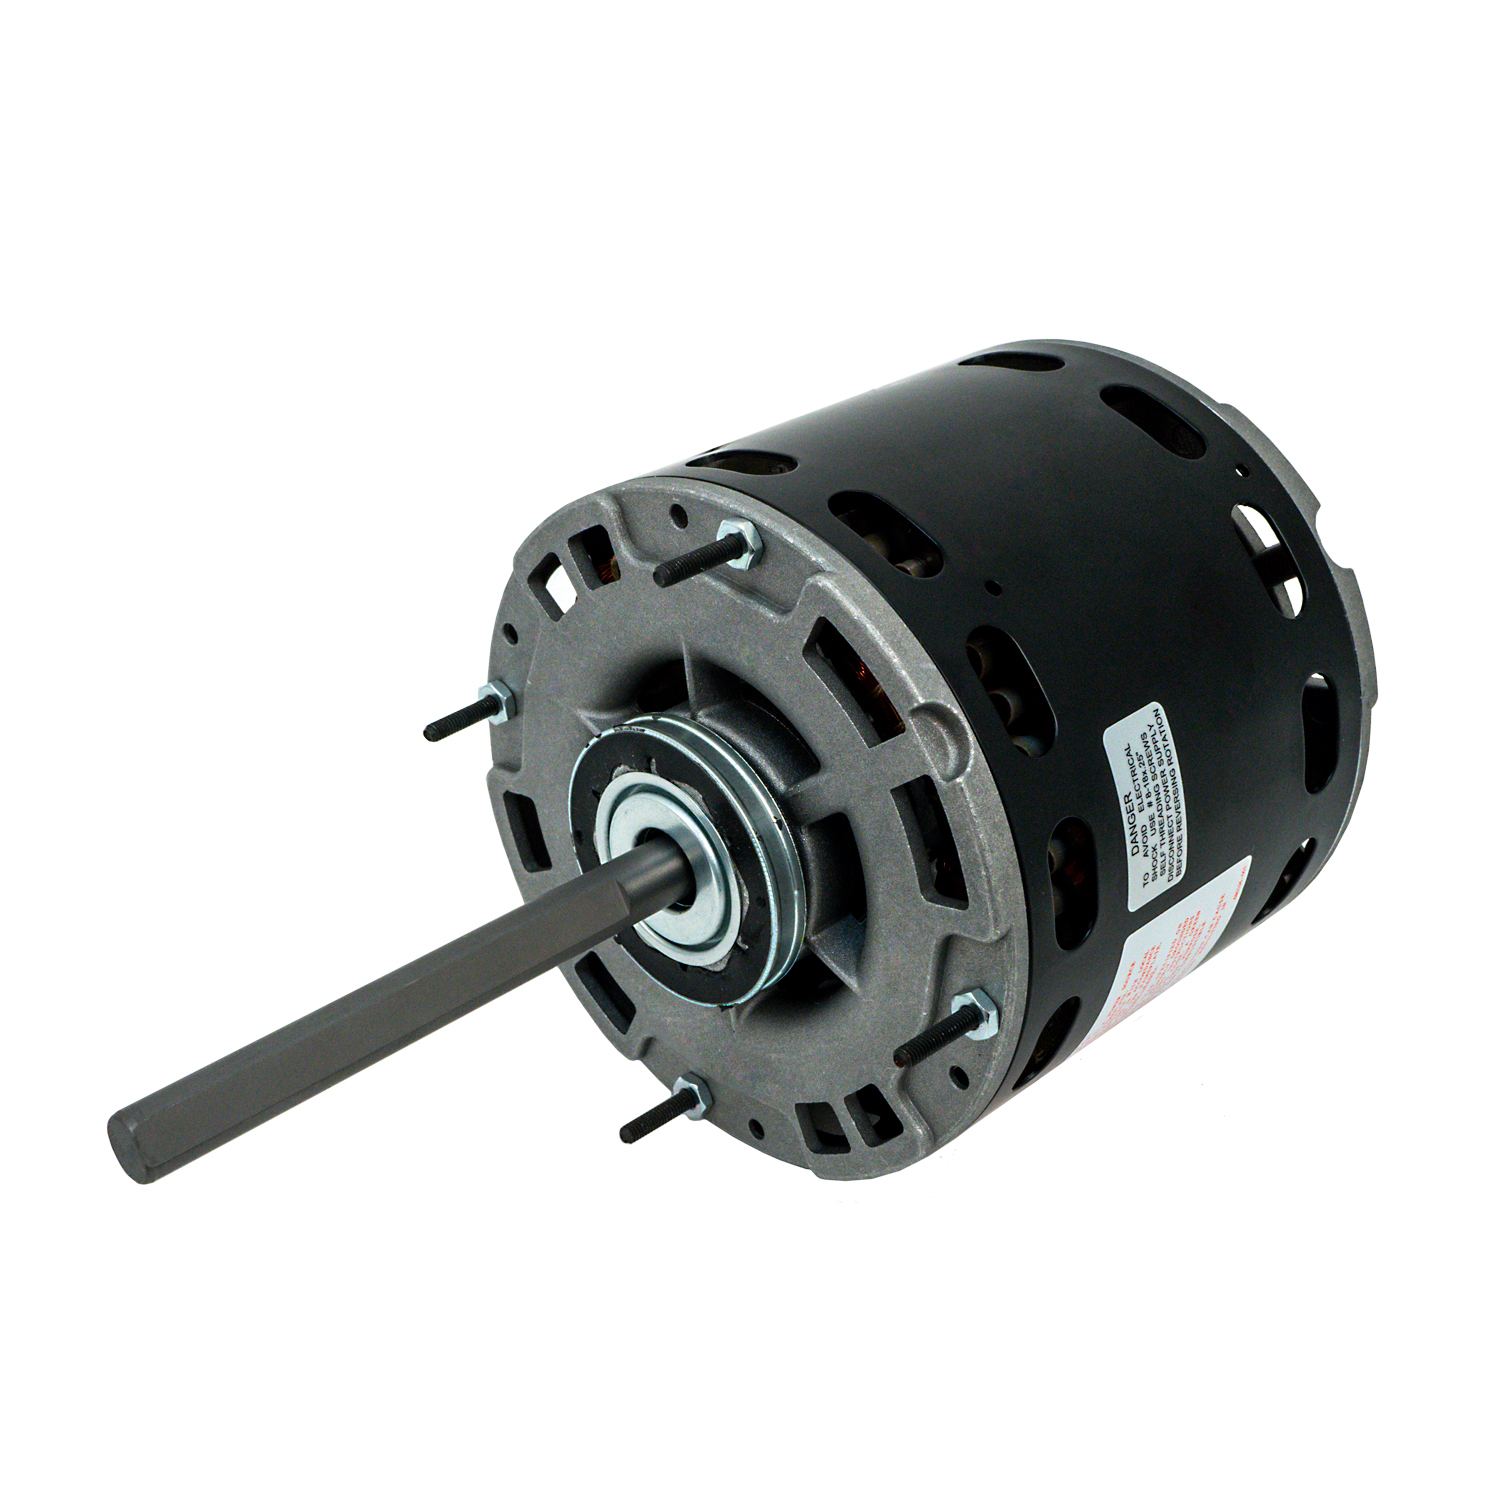 48 Frame Direct Drive Blower Motor 1/6 HP, 208-230 Volts, 1075 RPM, 3 Speed